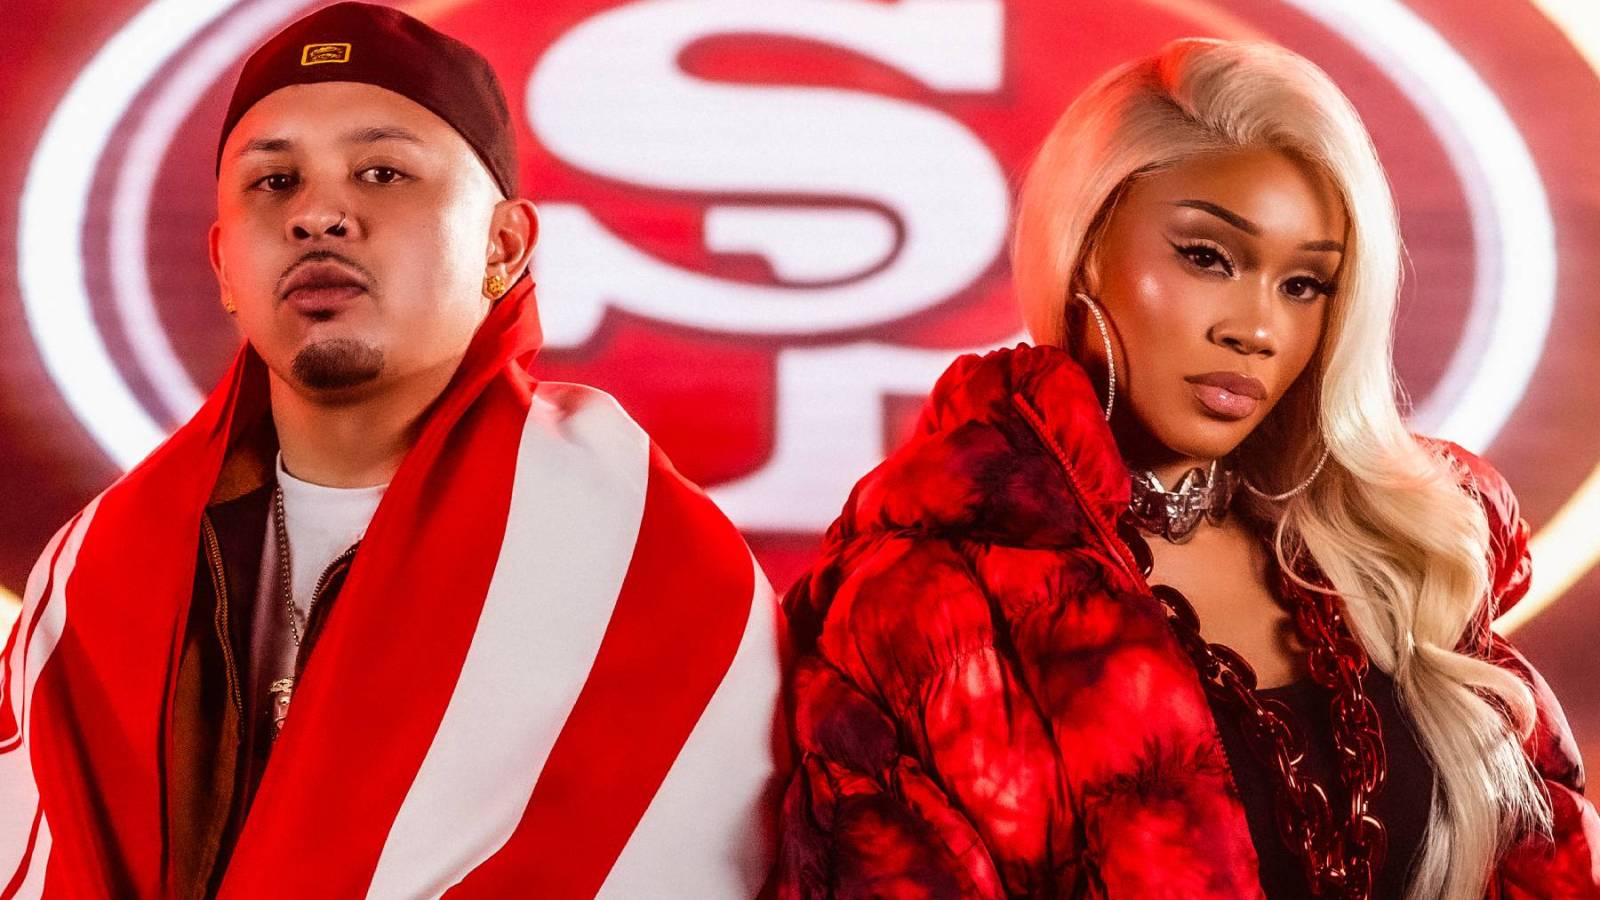 Saweetie and P-Lo Drop ‘Bay-Triotic’ 49ers Anthem in Time for NFL Playoffs